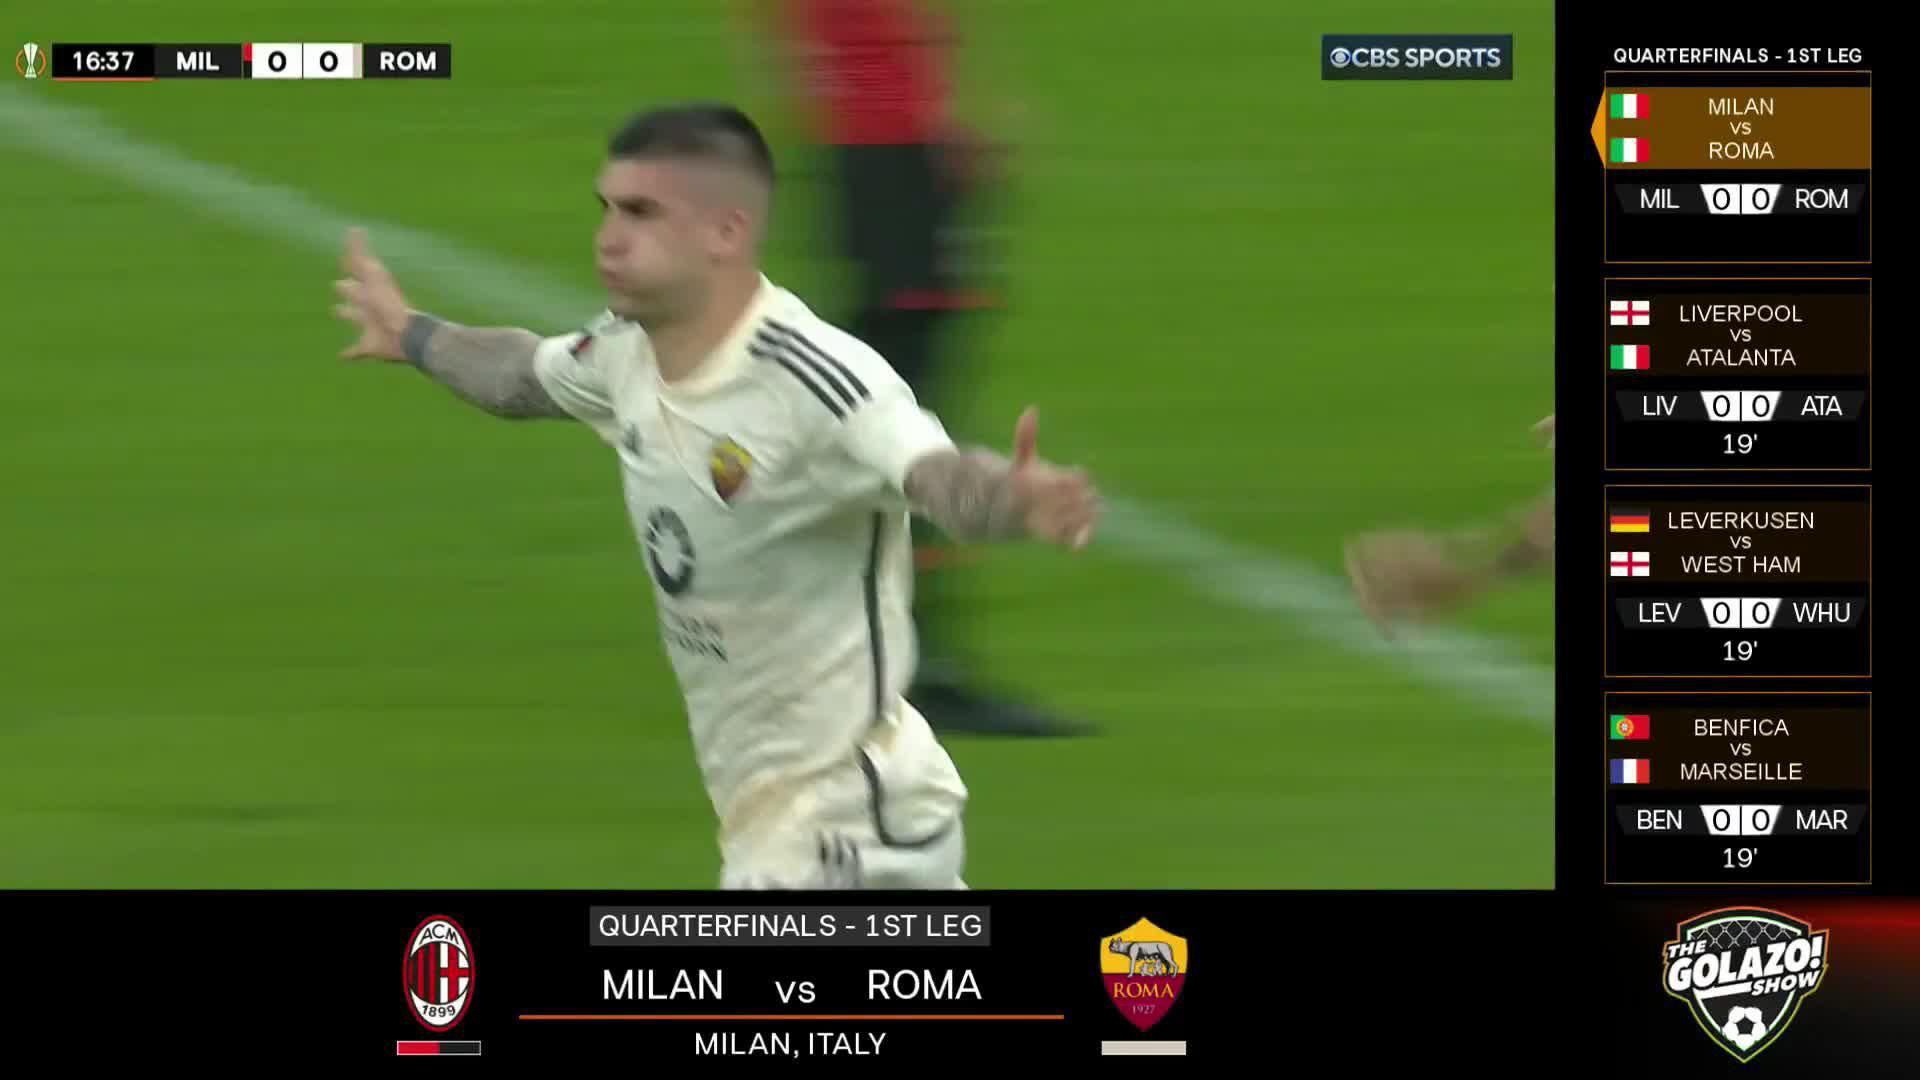 Gianluca Mancini does it again!The Derby della Capitale hero strikes for Roma, this time at the San Siro vs. Milan 🐺